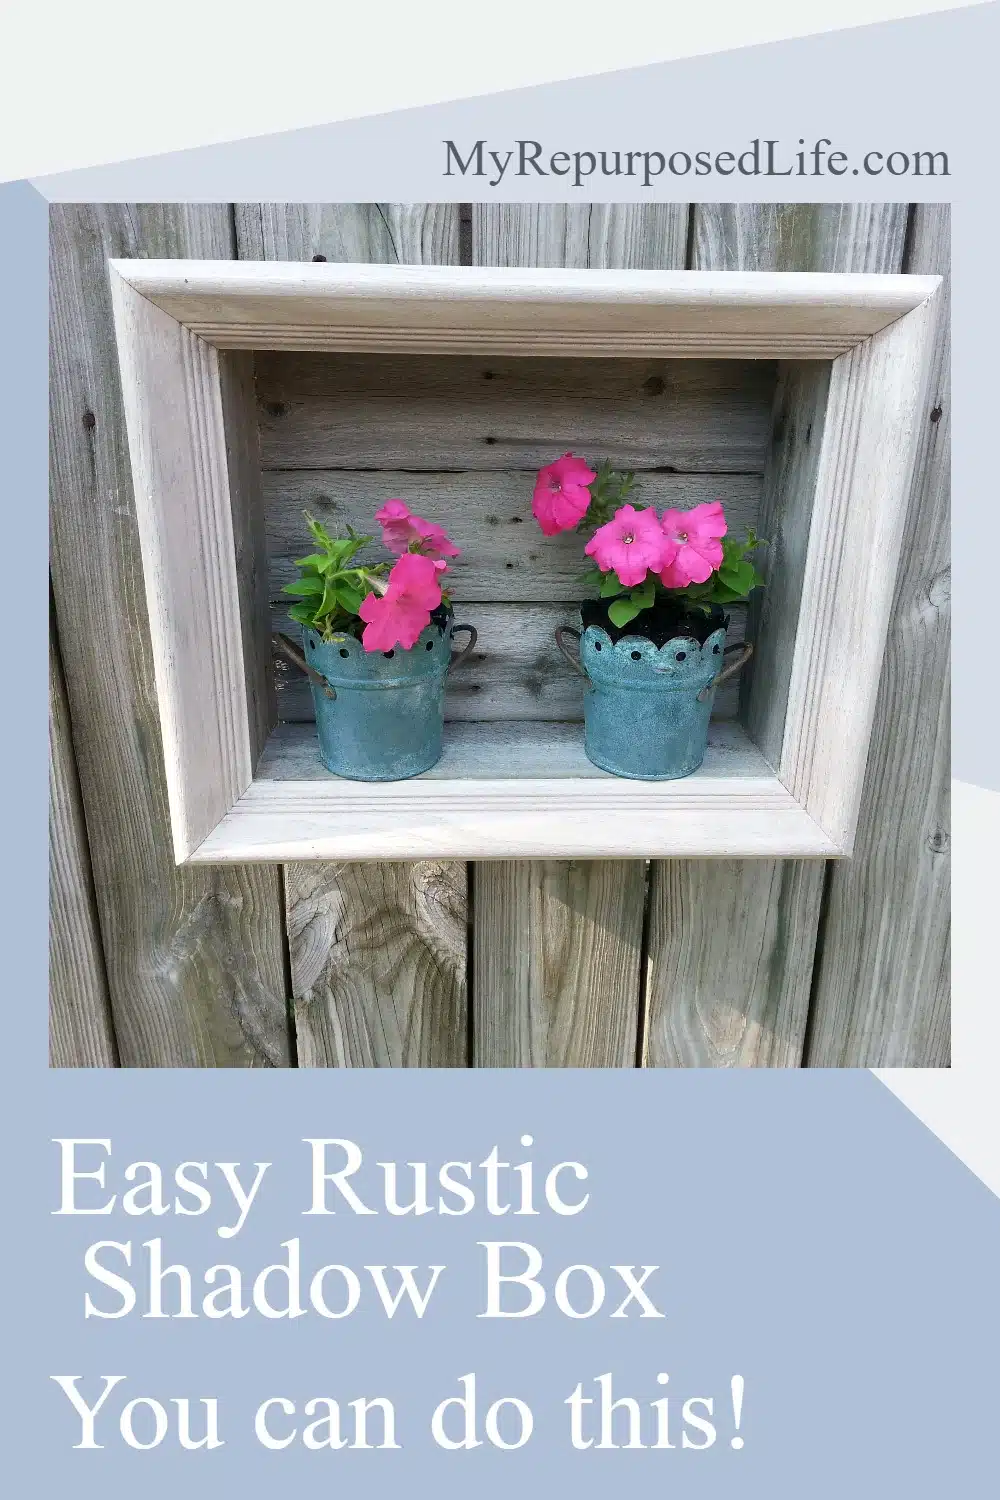 How to make a rustic shadow box out of reclaimed fence boards and a thrift store picture frame. You can make this by following this step by step tutorial. #MyRepurposedLife #diy #rustic #shadowBOX via @repurposedlife